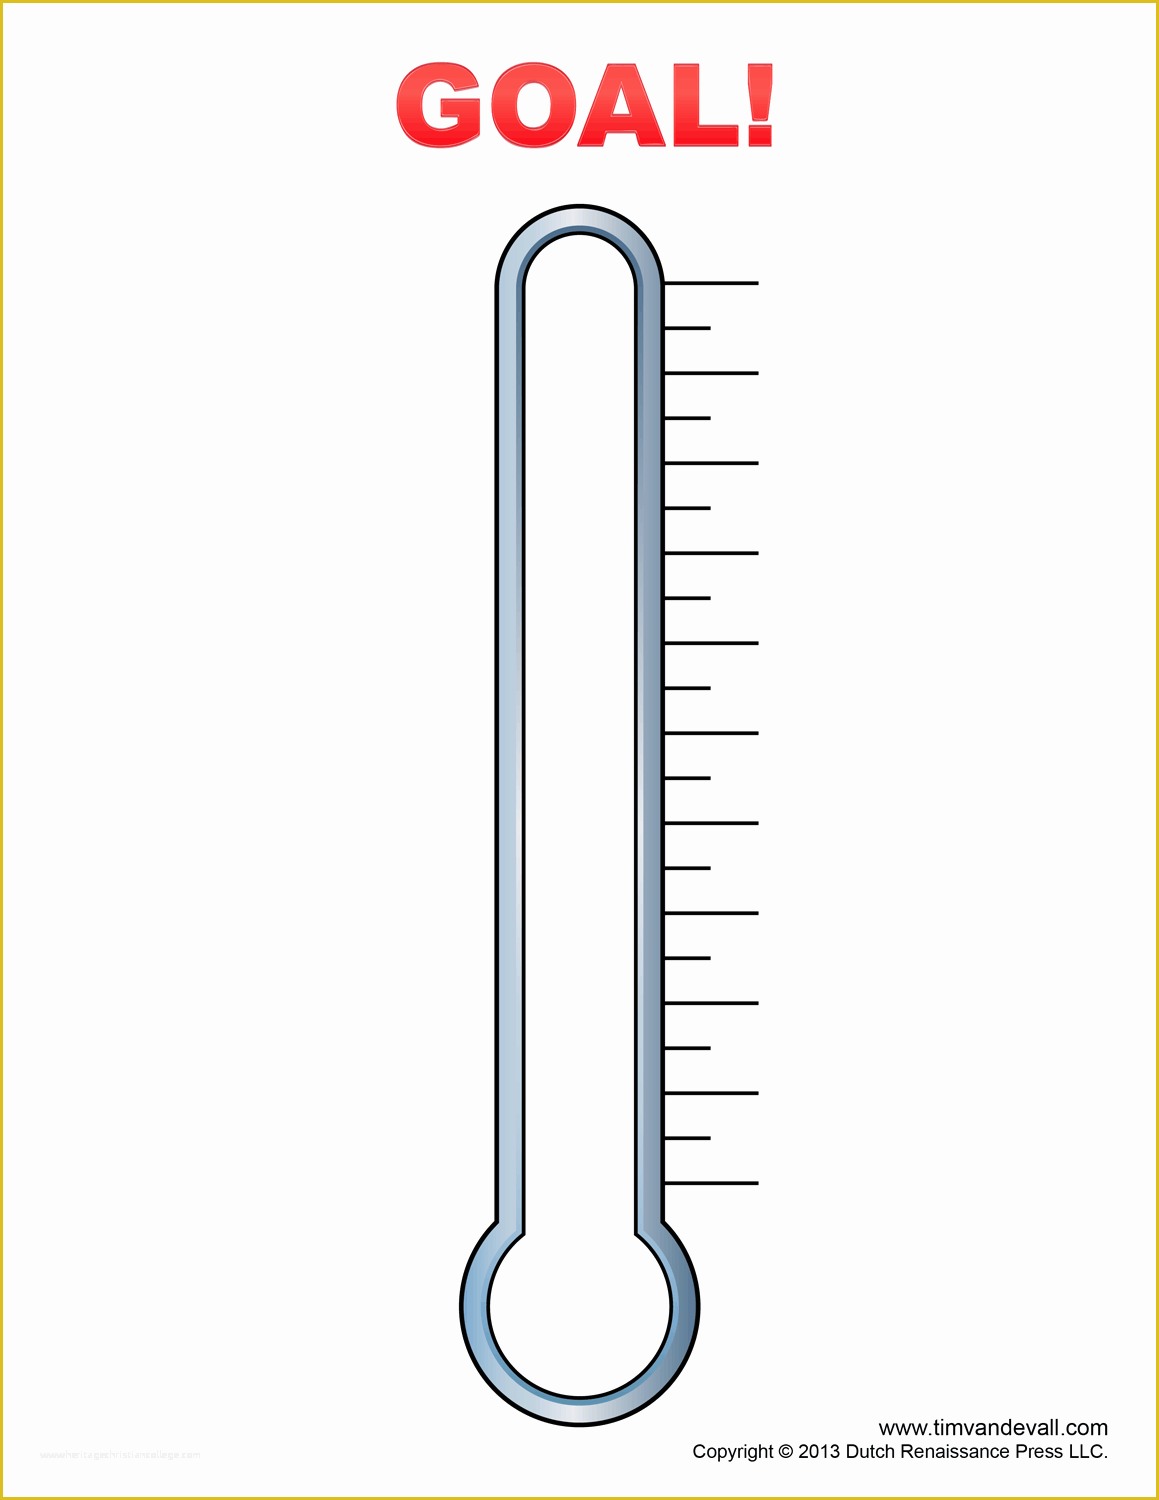 Free Editable thermometer Template Of Fundraising thermometer Templates for Fundraising events